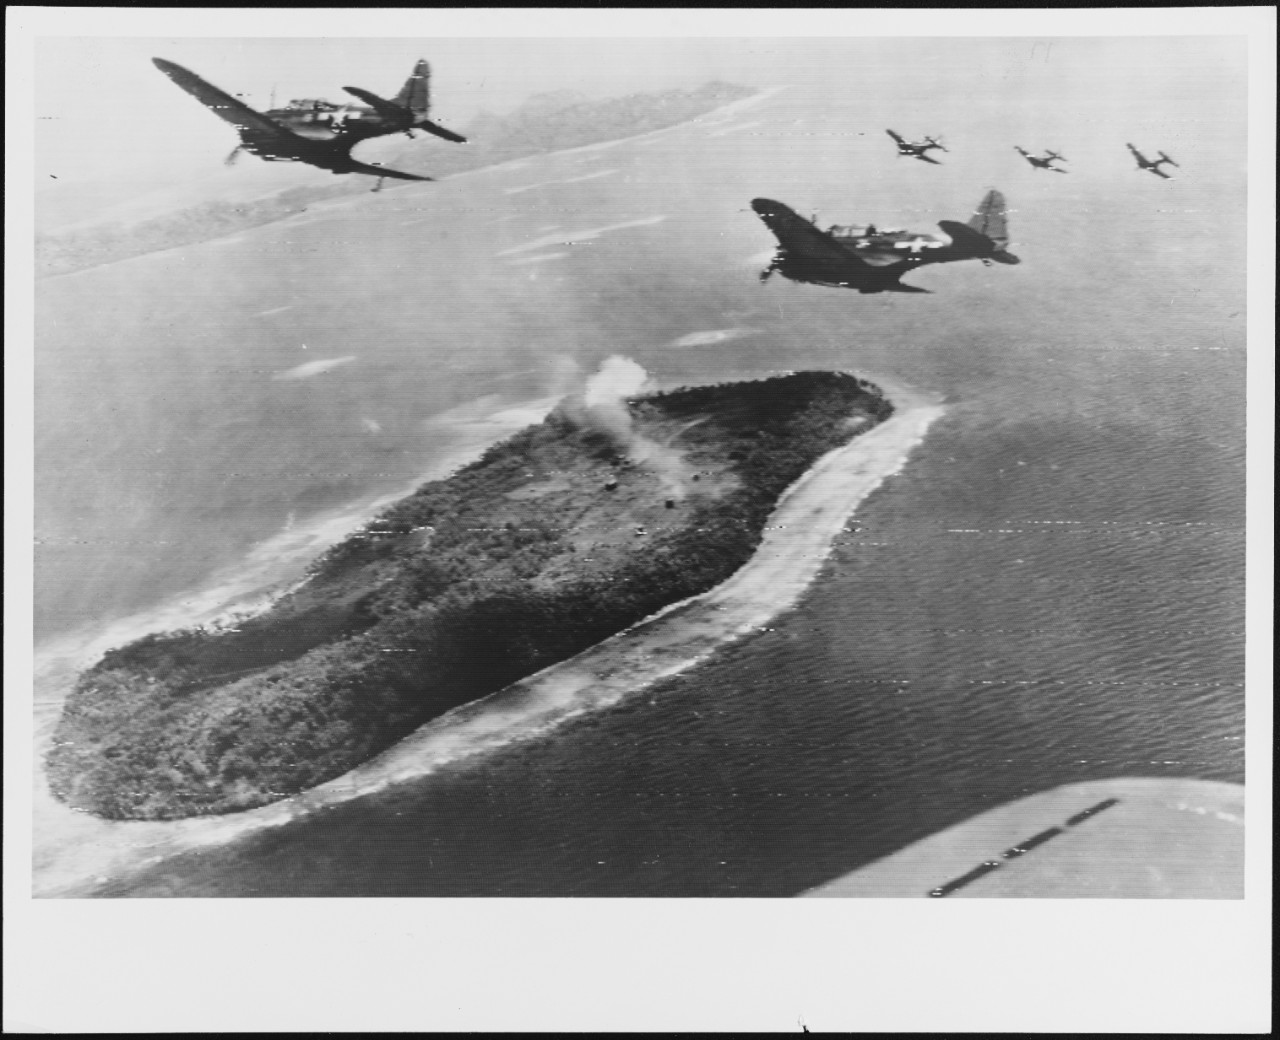 Five SBD's from a Navy carrier peel off for a strafing attack on a Japanese radio station, Ulalu Island, Truk Atoll, in the strike of April 29-30, 1944.